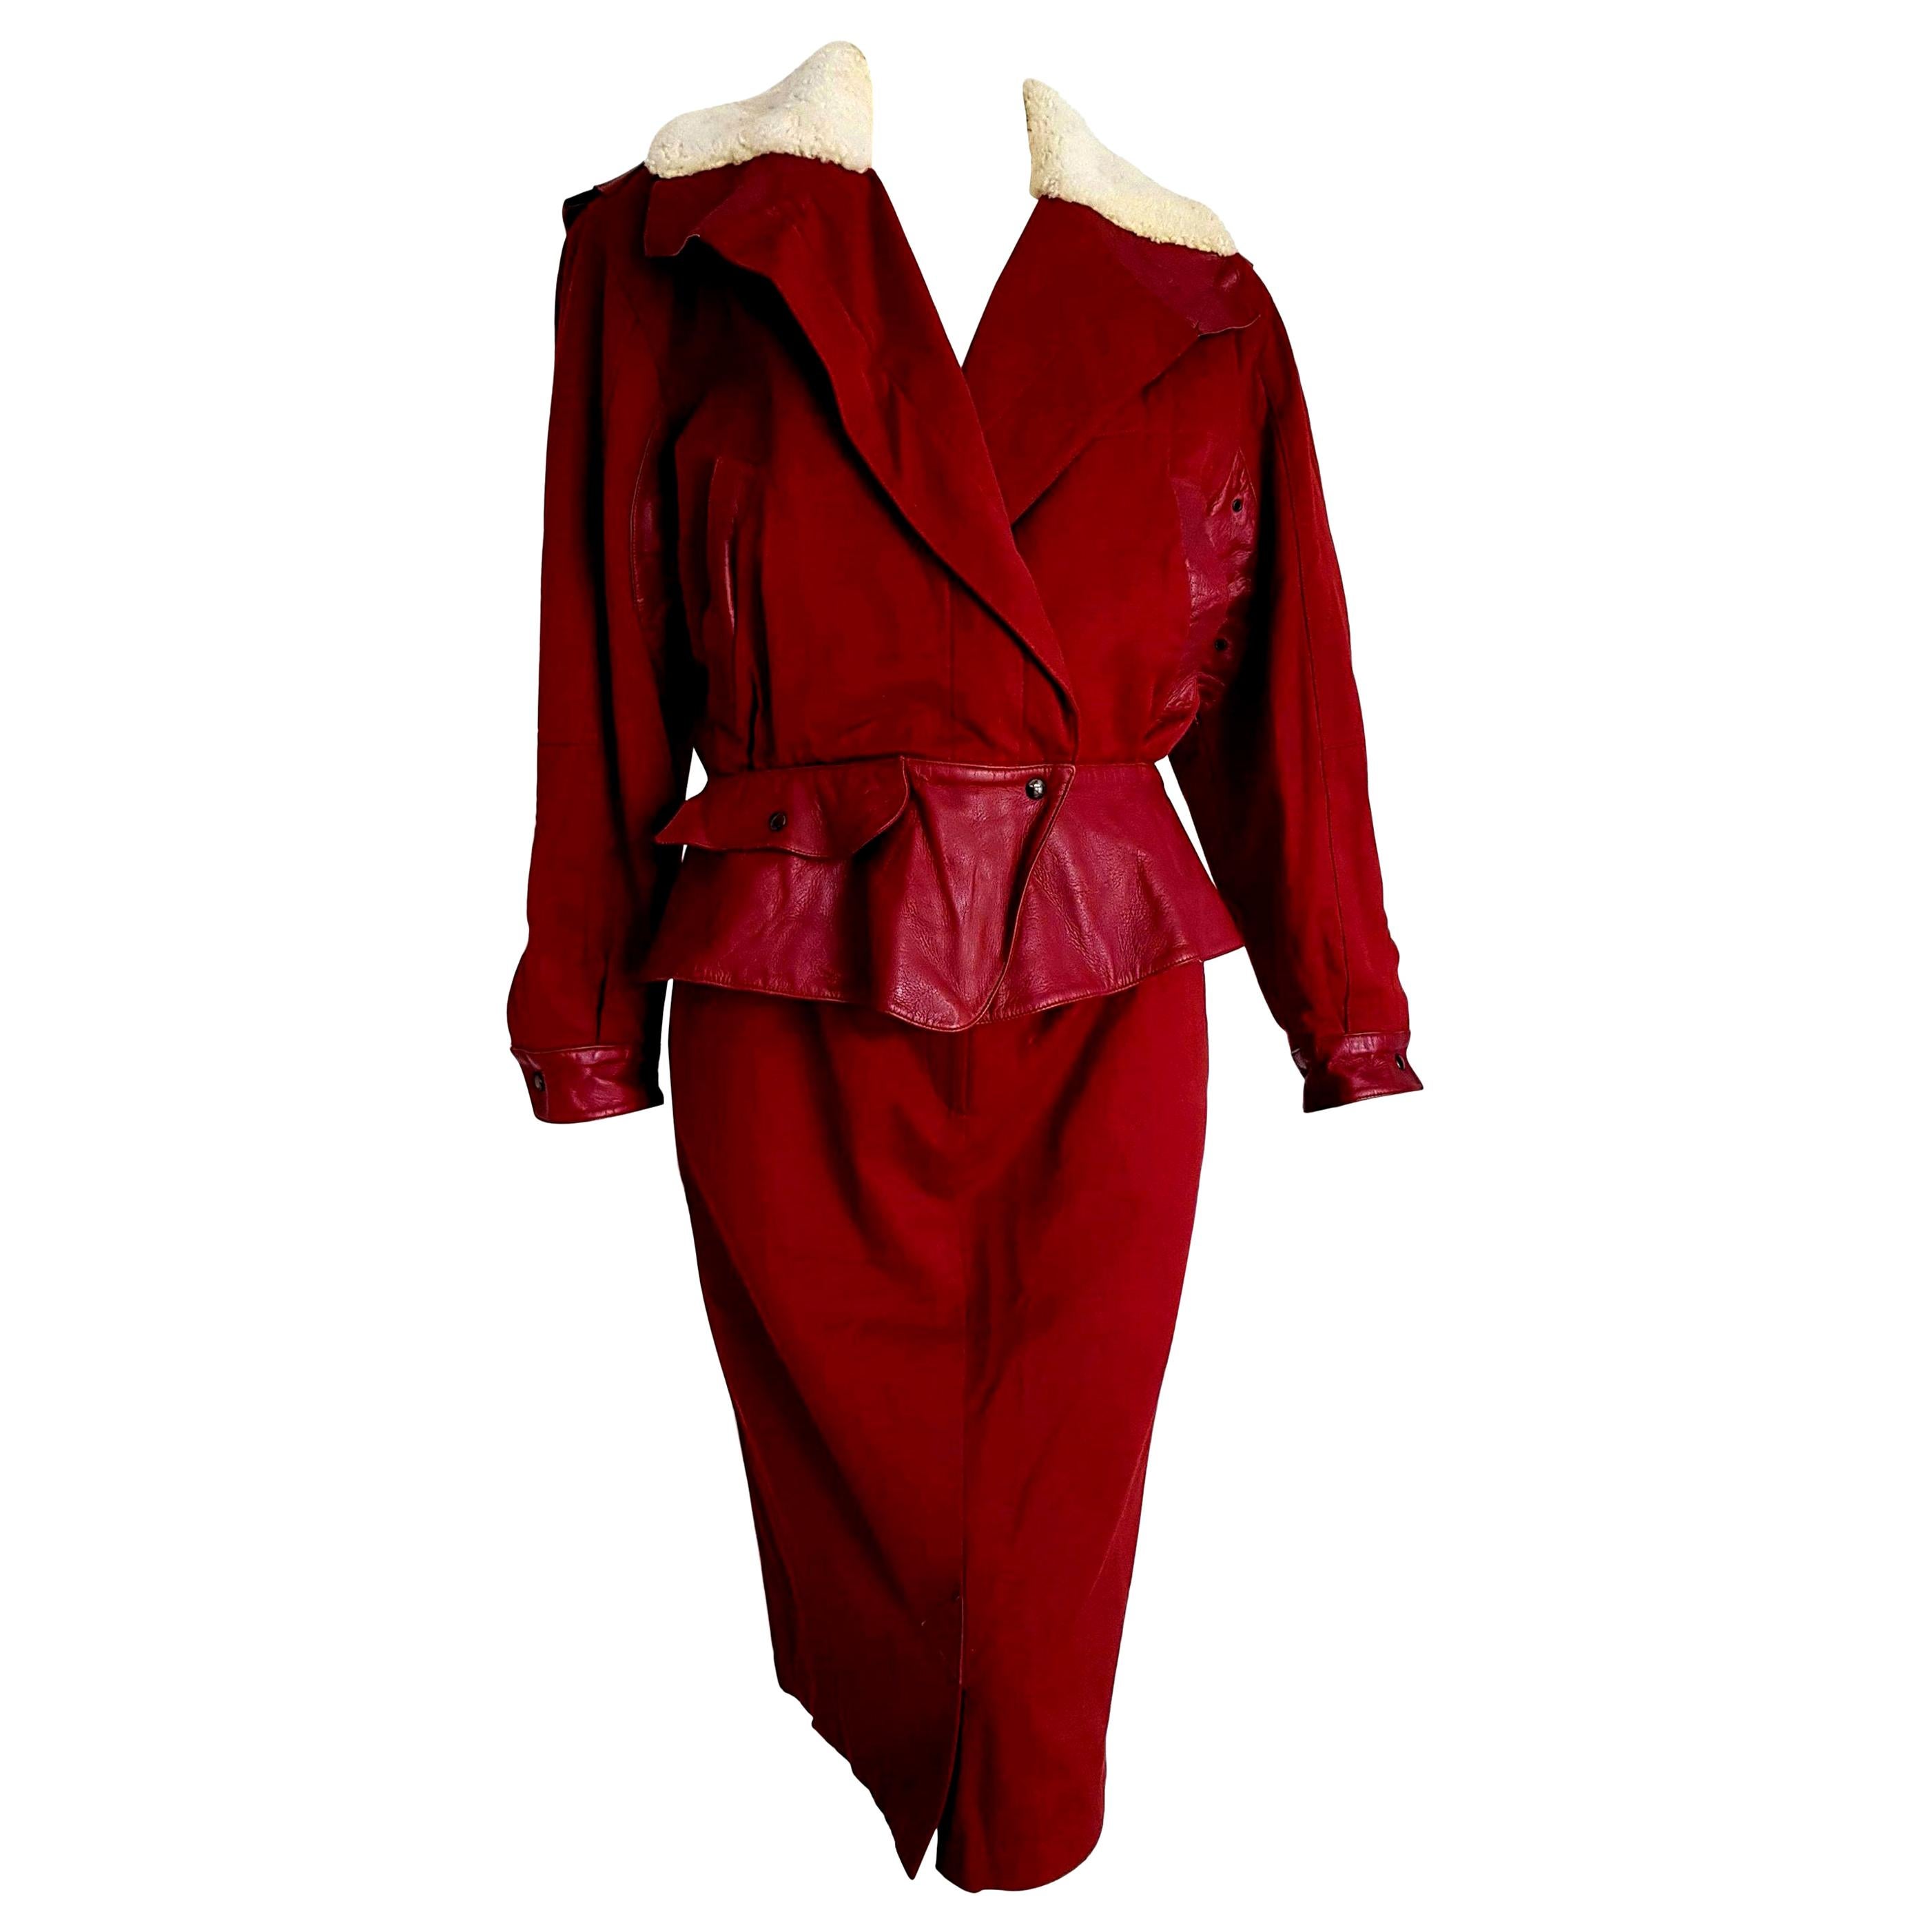 Claude MONTANA "New" Leather and Cotton Jacket and Skirt Burgundy Suit - Unworn For Sale